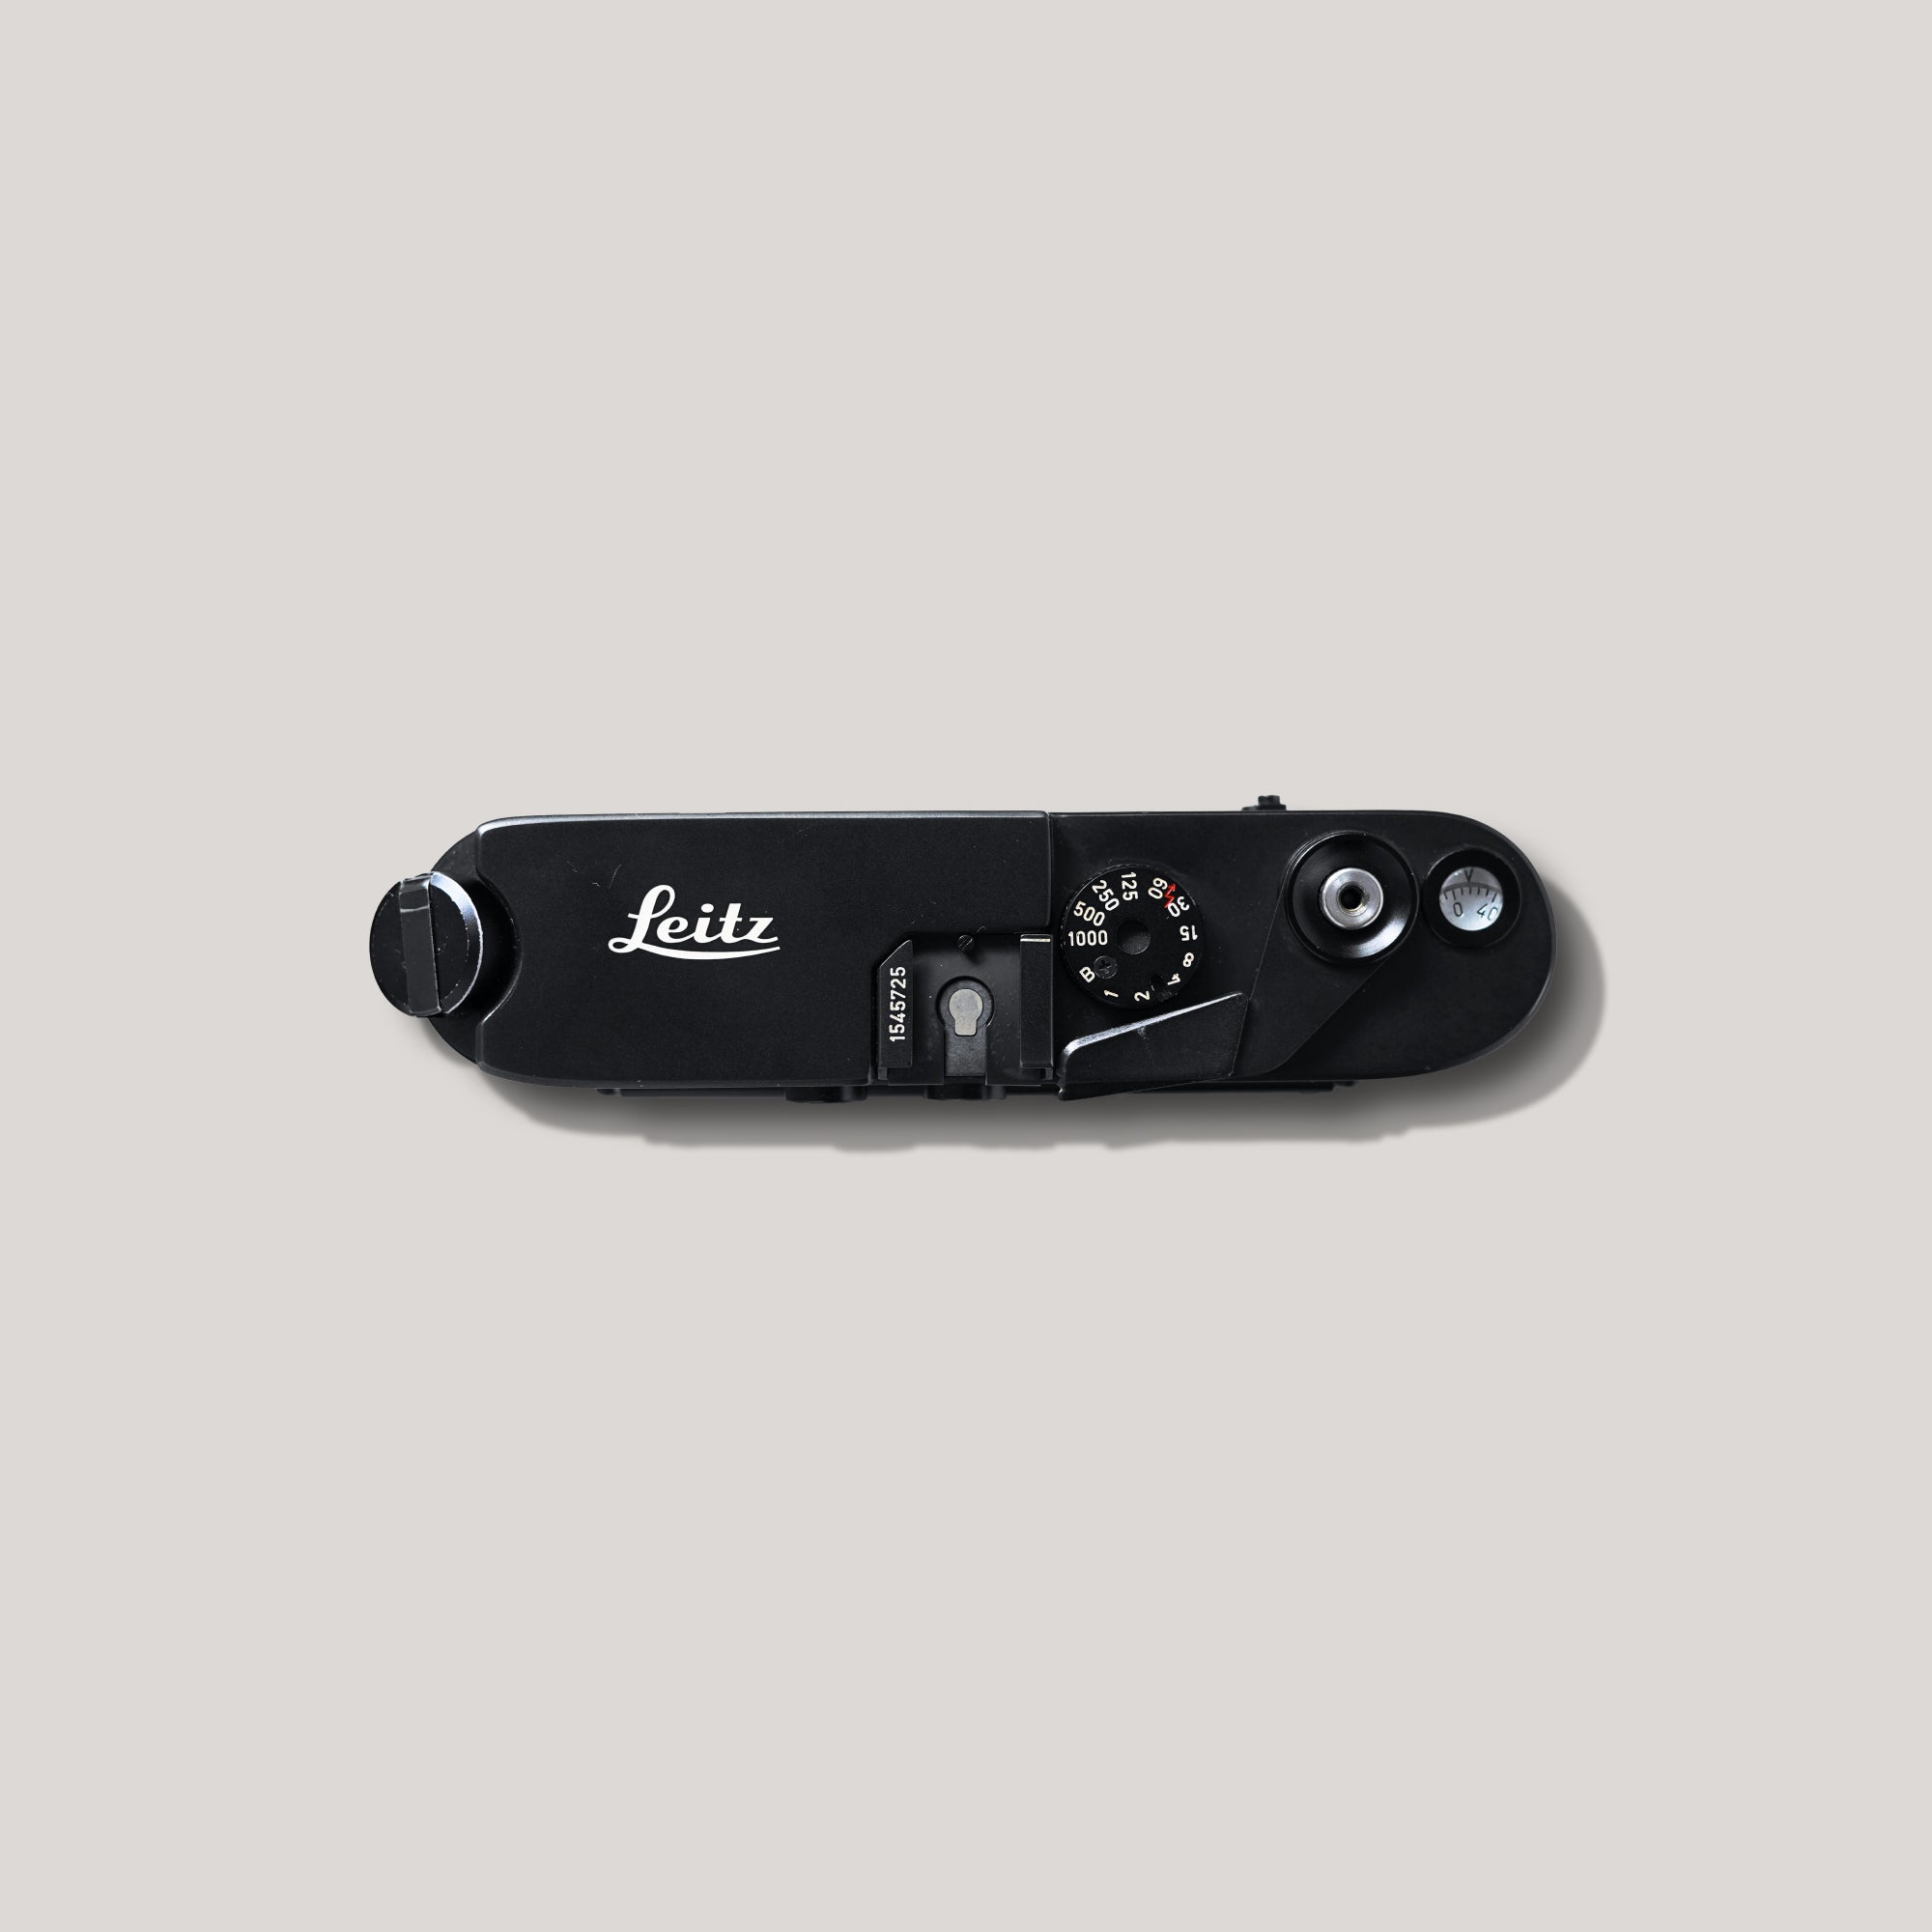 Buy Leica MD-2 now at Analogue Amsterdam